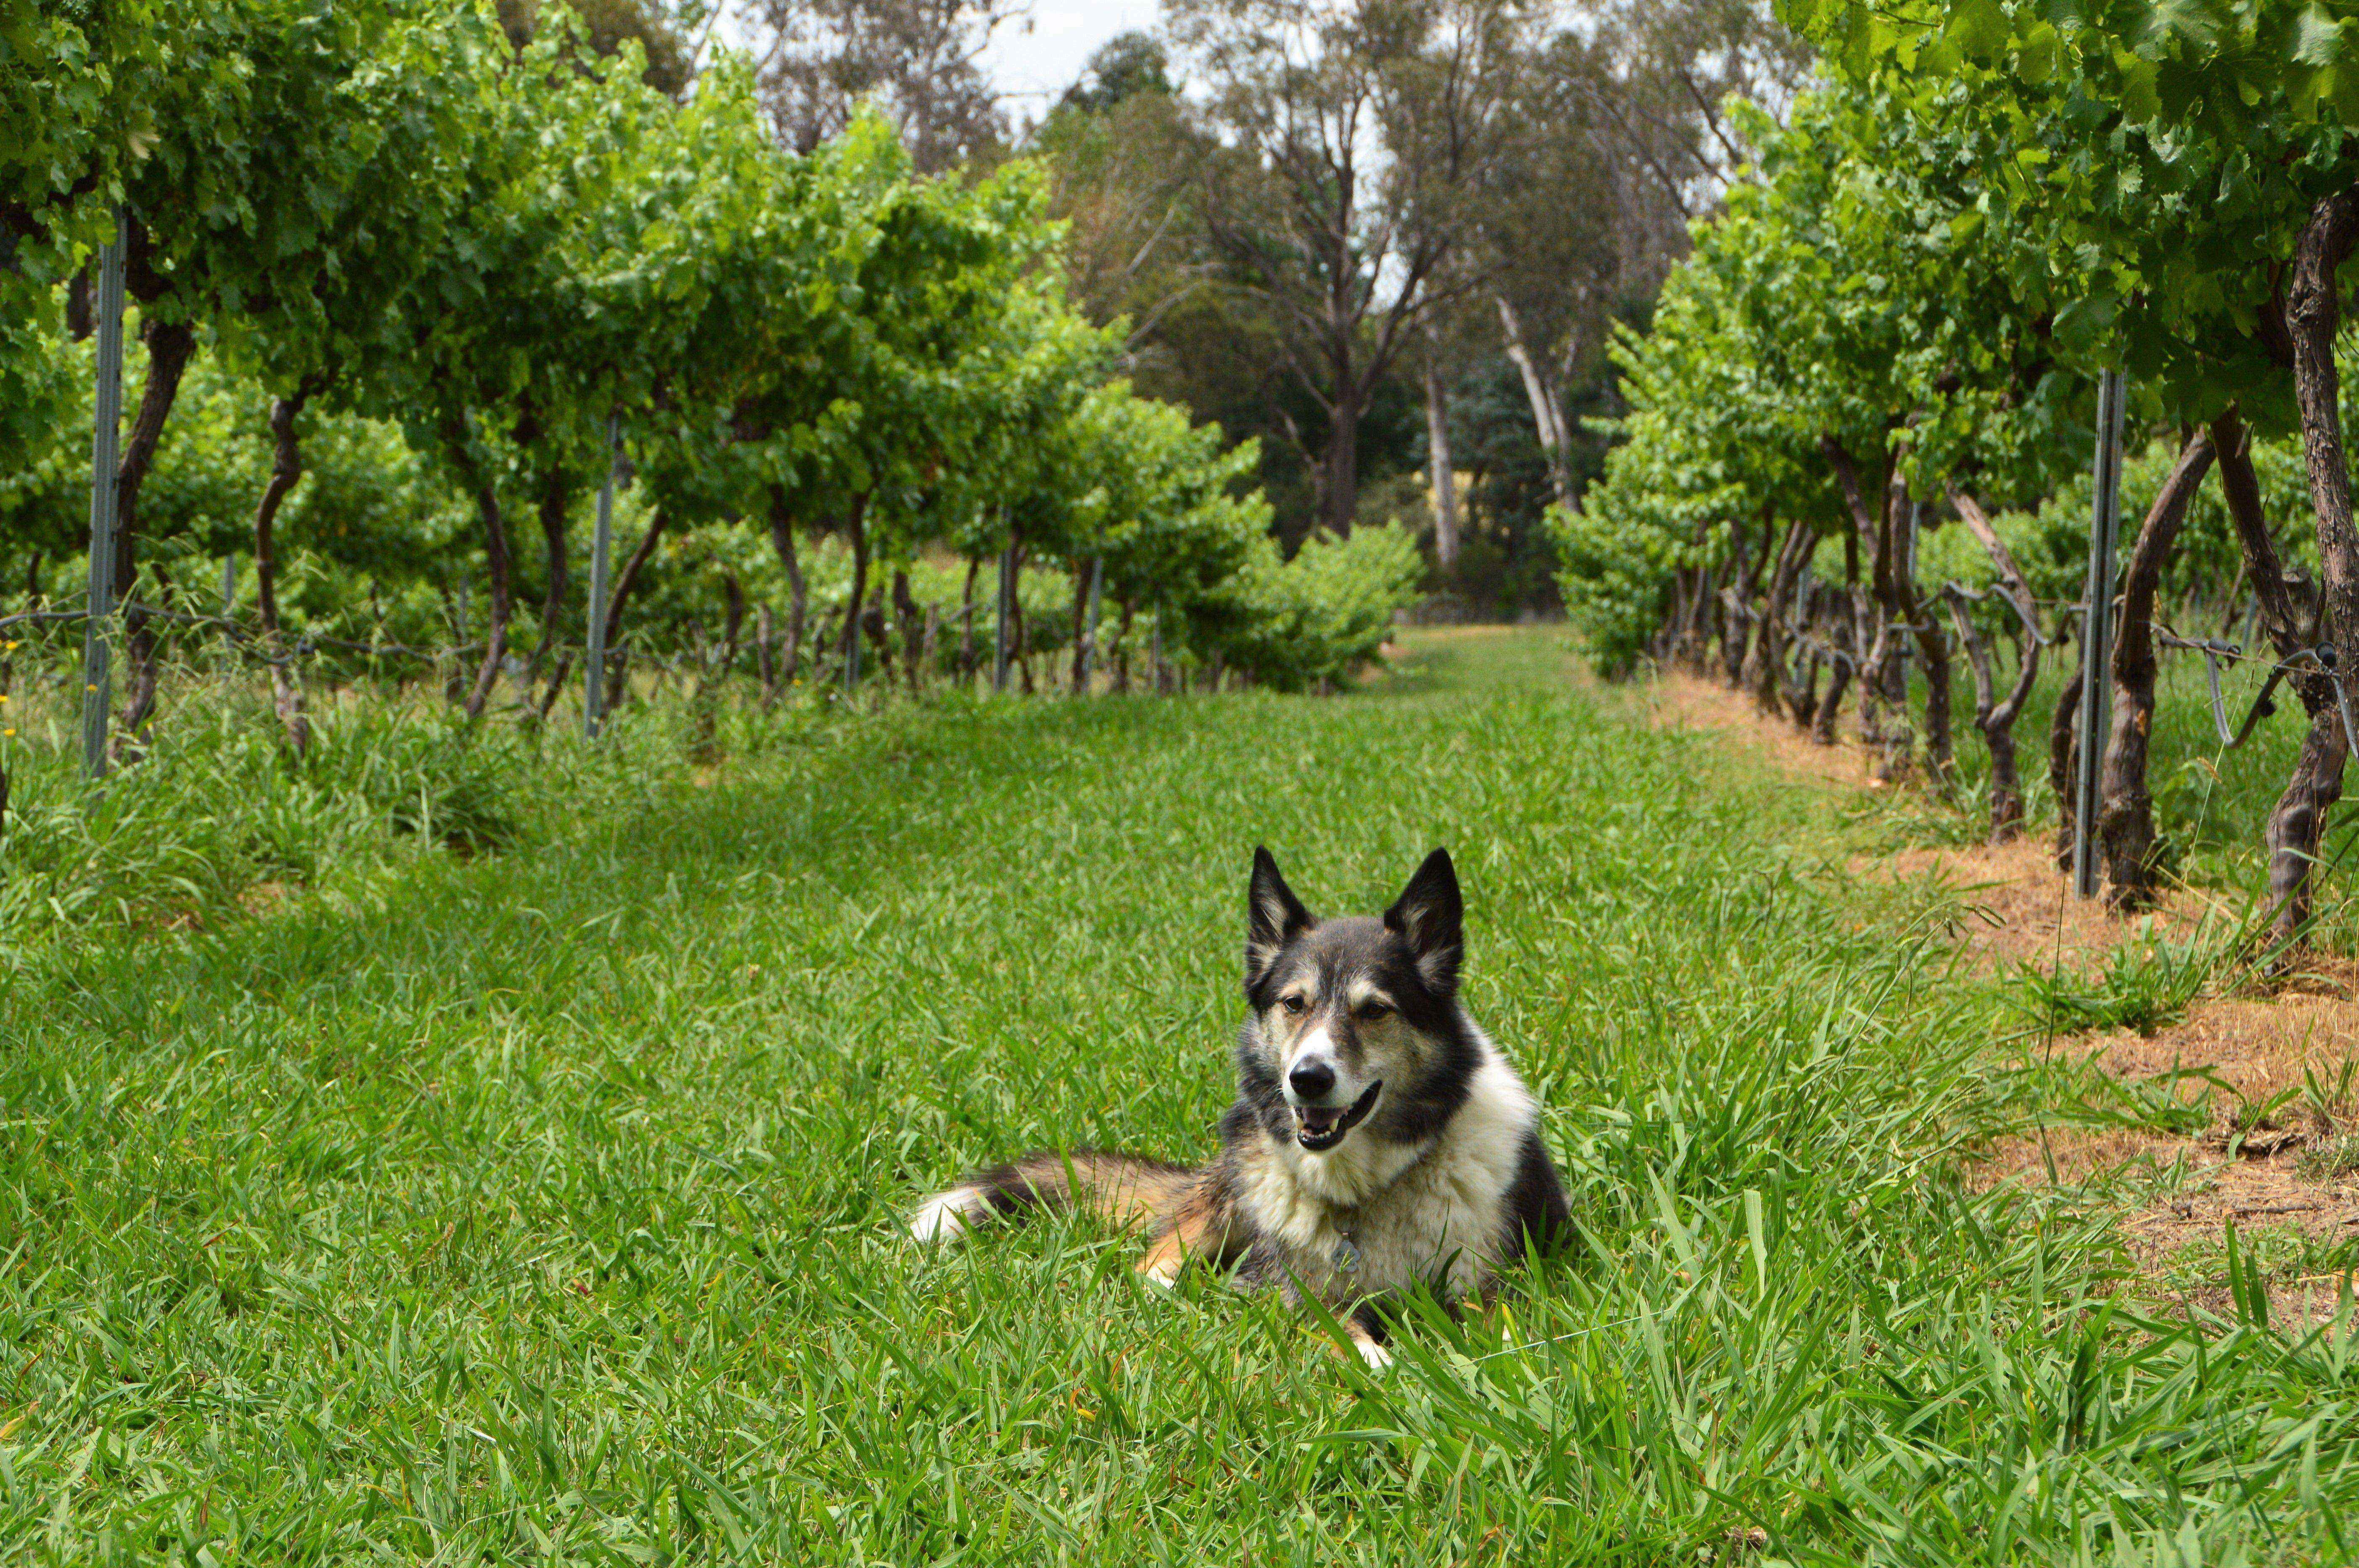 Murrumbateman Winery combines the joys of wine-tasting with a love of dogs